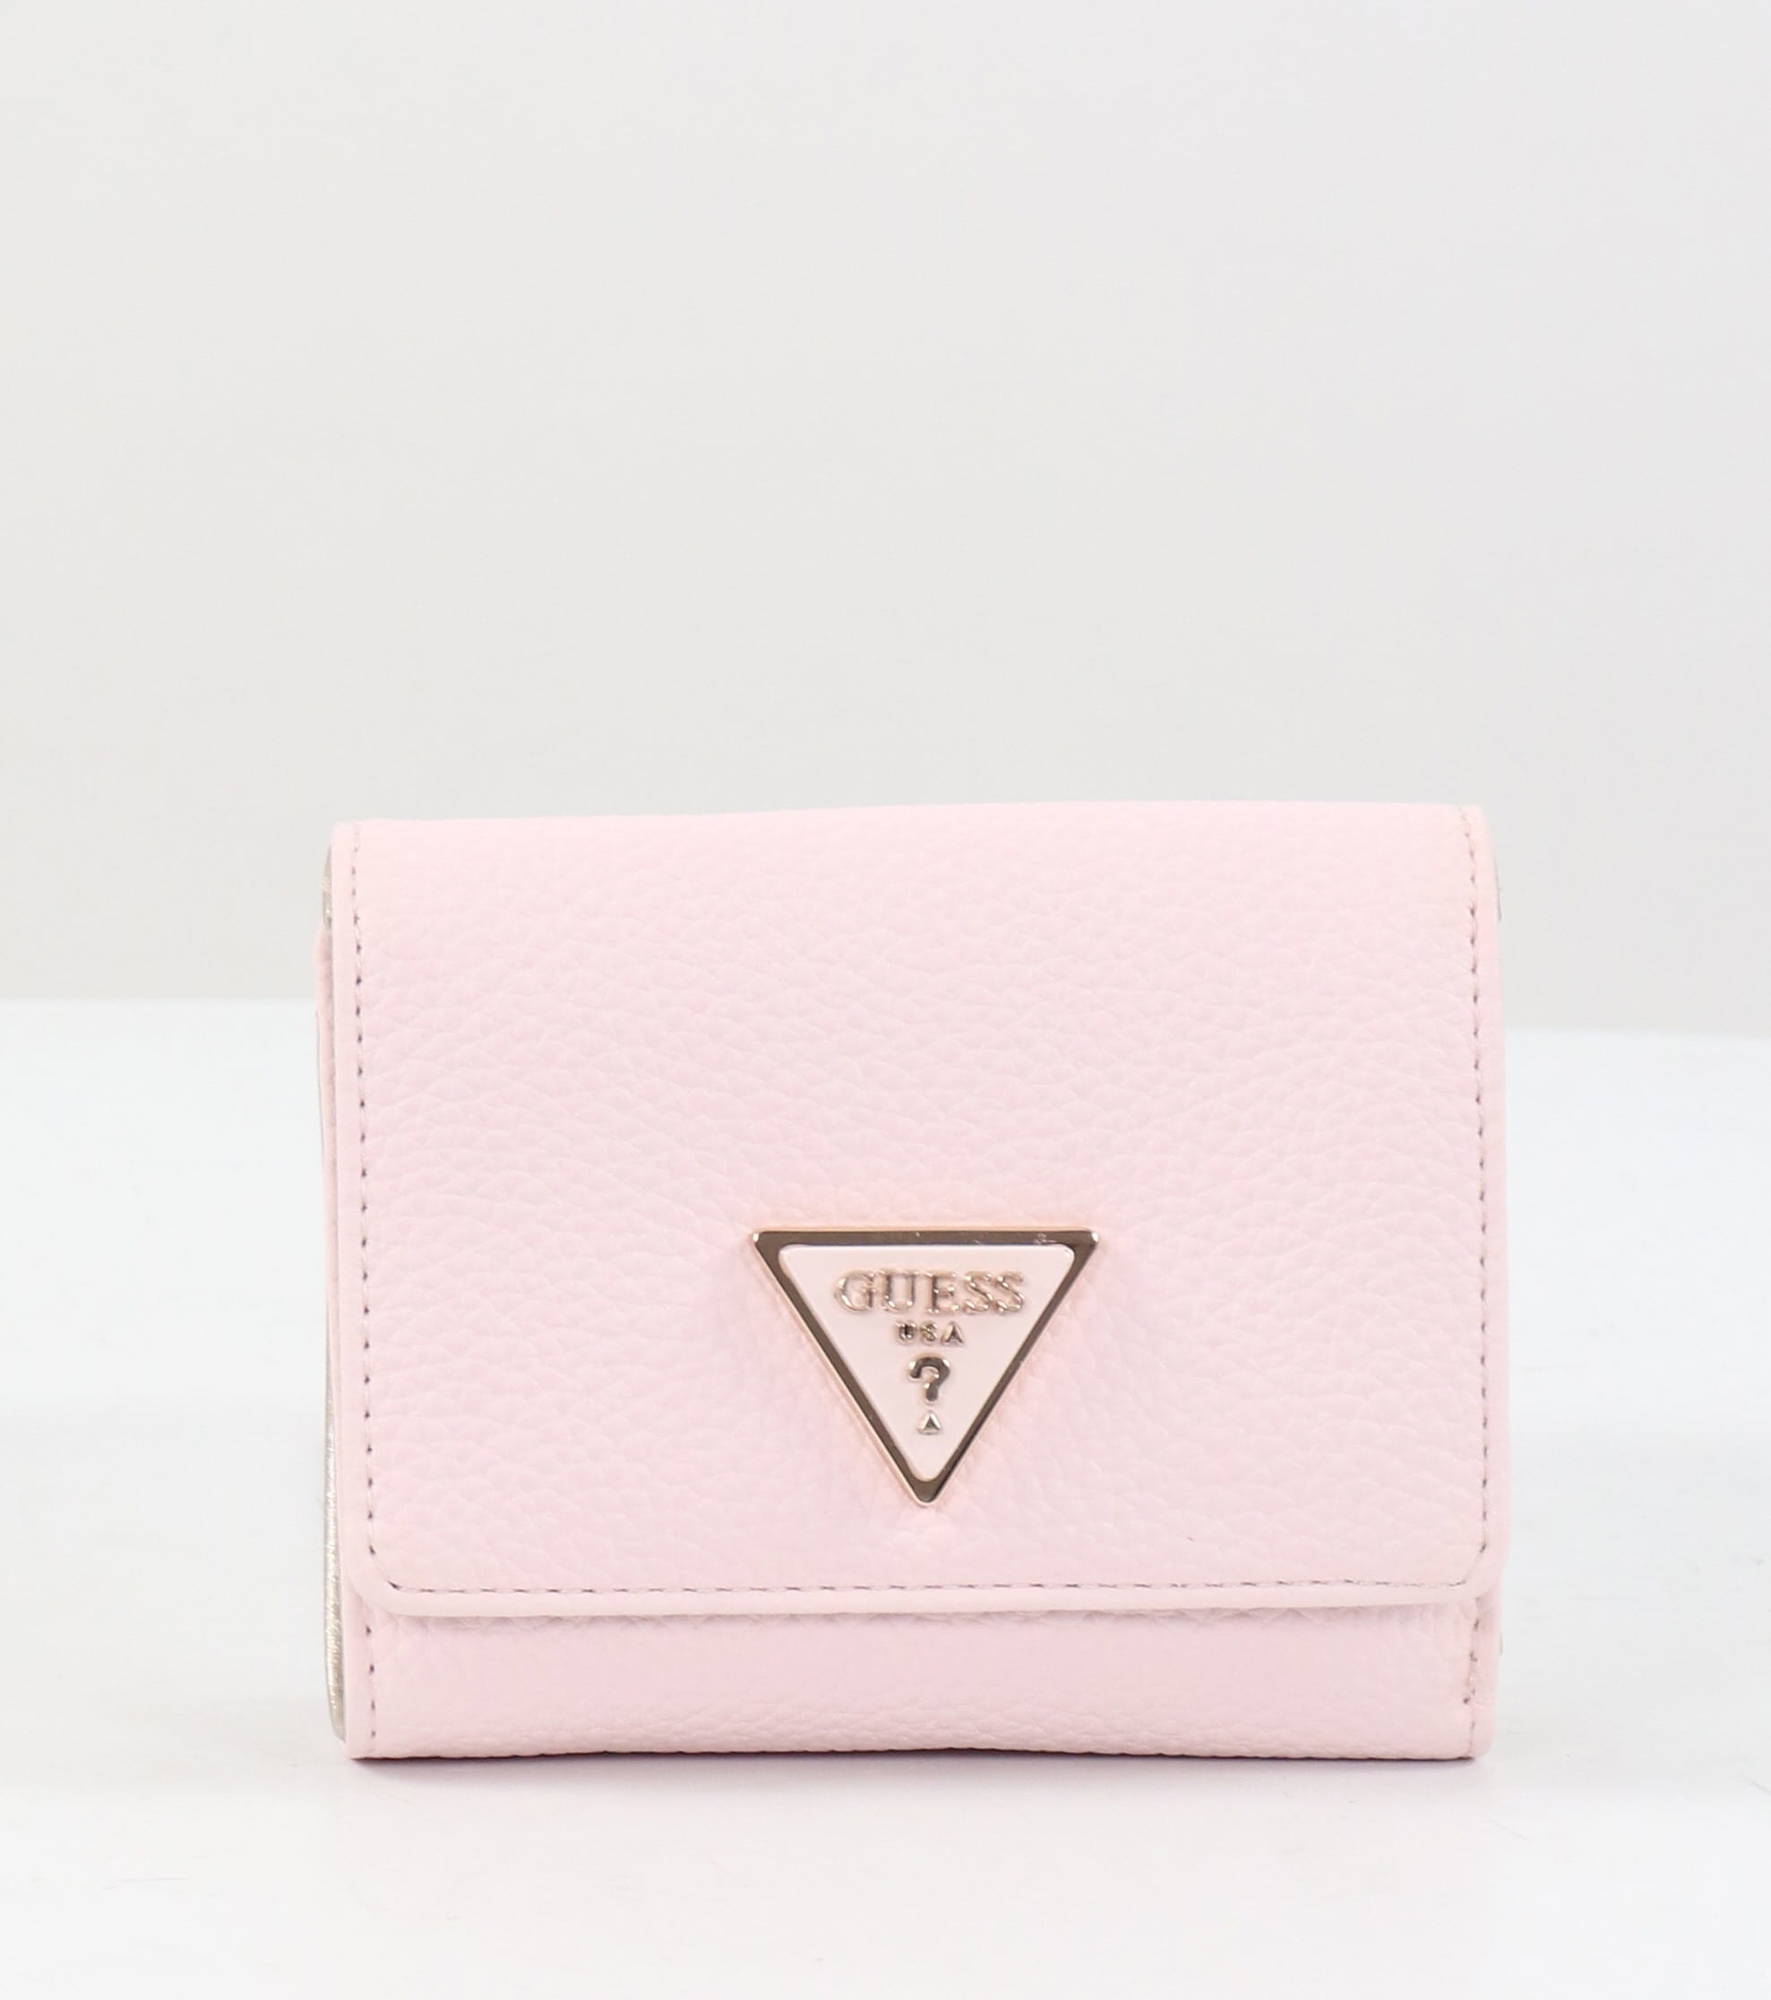 GUESS Warren Crossbody Bag in Coral/Pink with Clip-On Coin Purse Keychain |  Purses, Bags, Coin purse